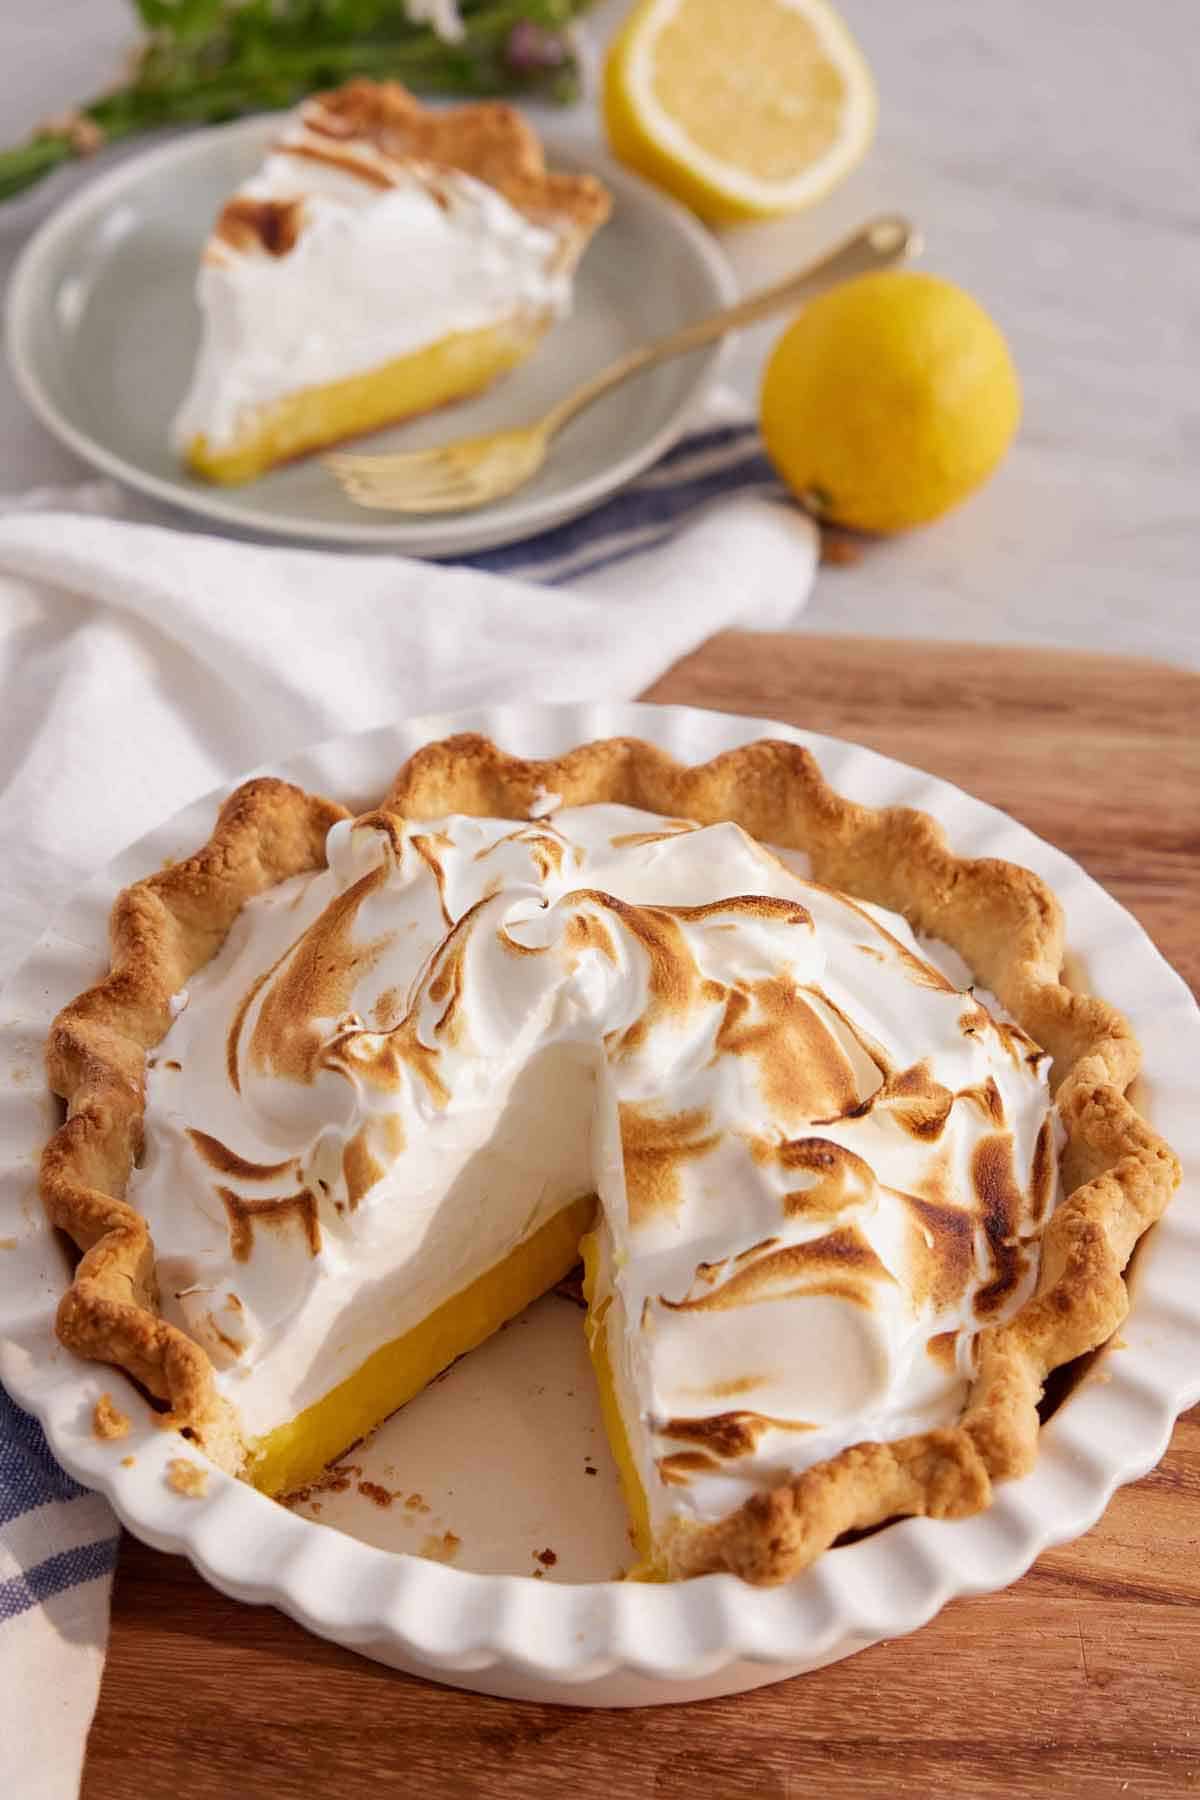 A baking dish with a lemon meringue pie inside with one slice cut out.